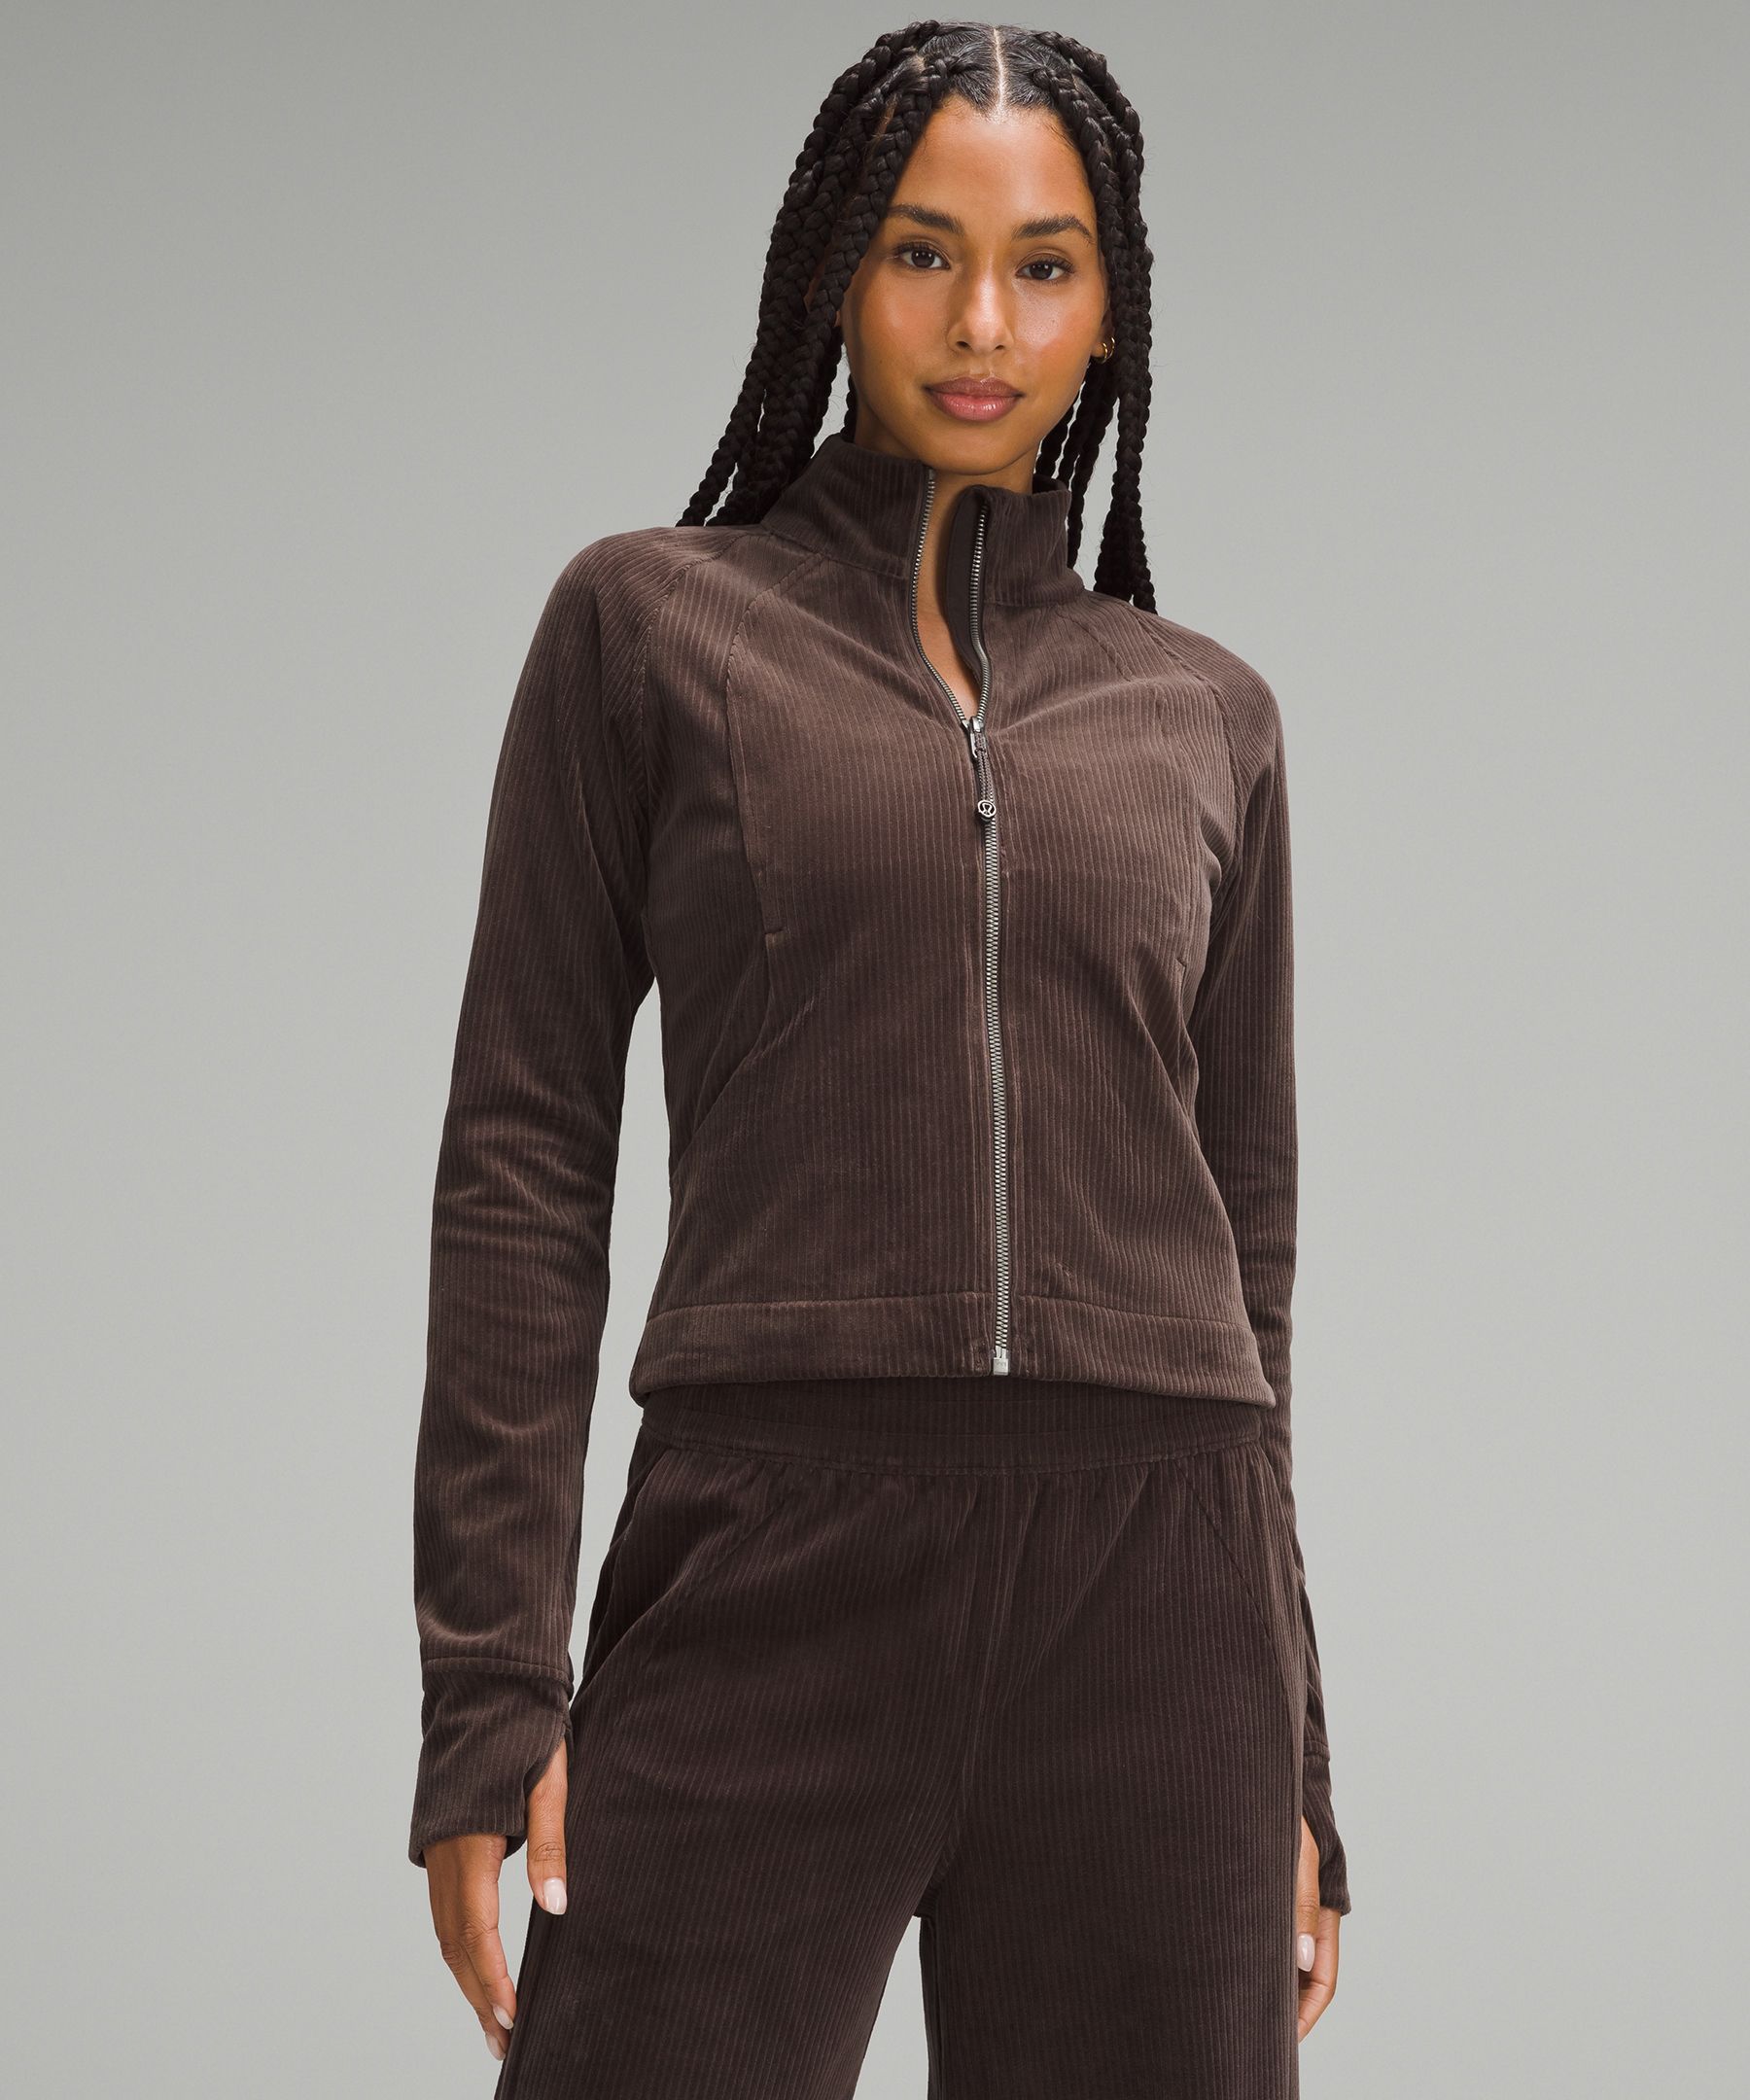 Buy 2 pieces for $50 LuLuLemon hoodie Size 8